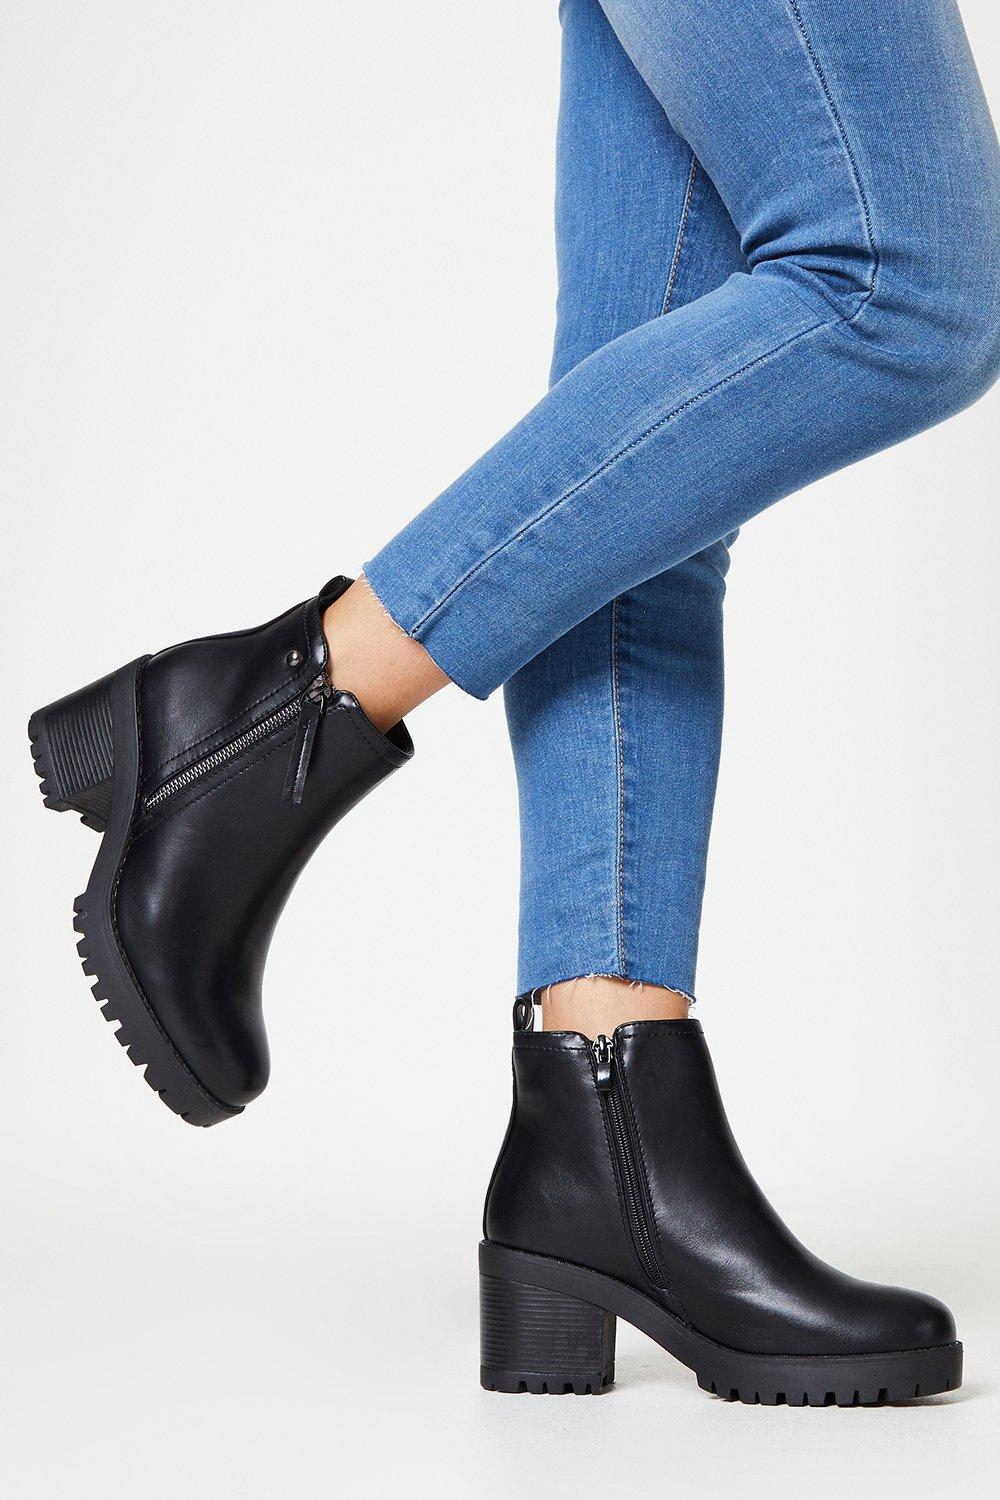 Women’s Faith: Madden Cleated Chunky Side Zip Block Heel Ankle Boots - black - 6